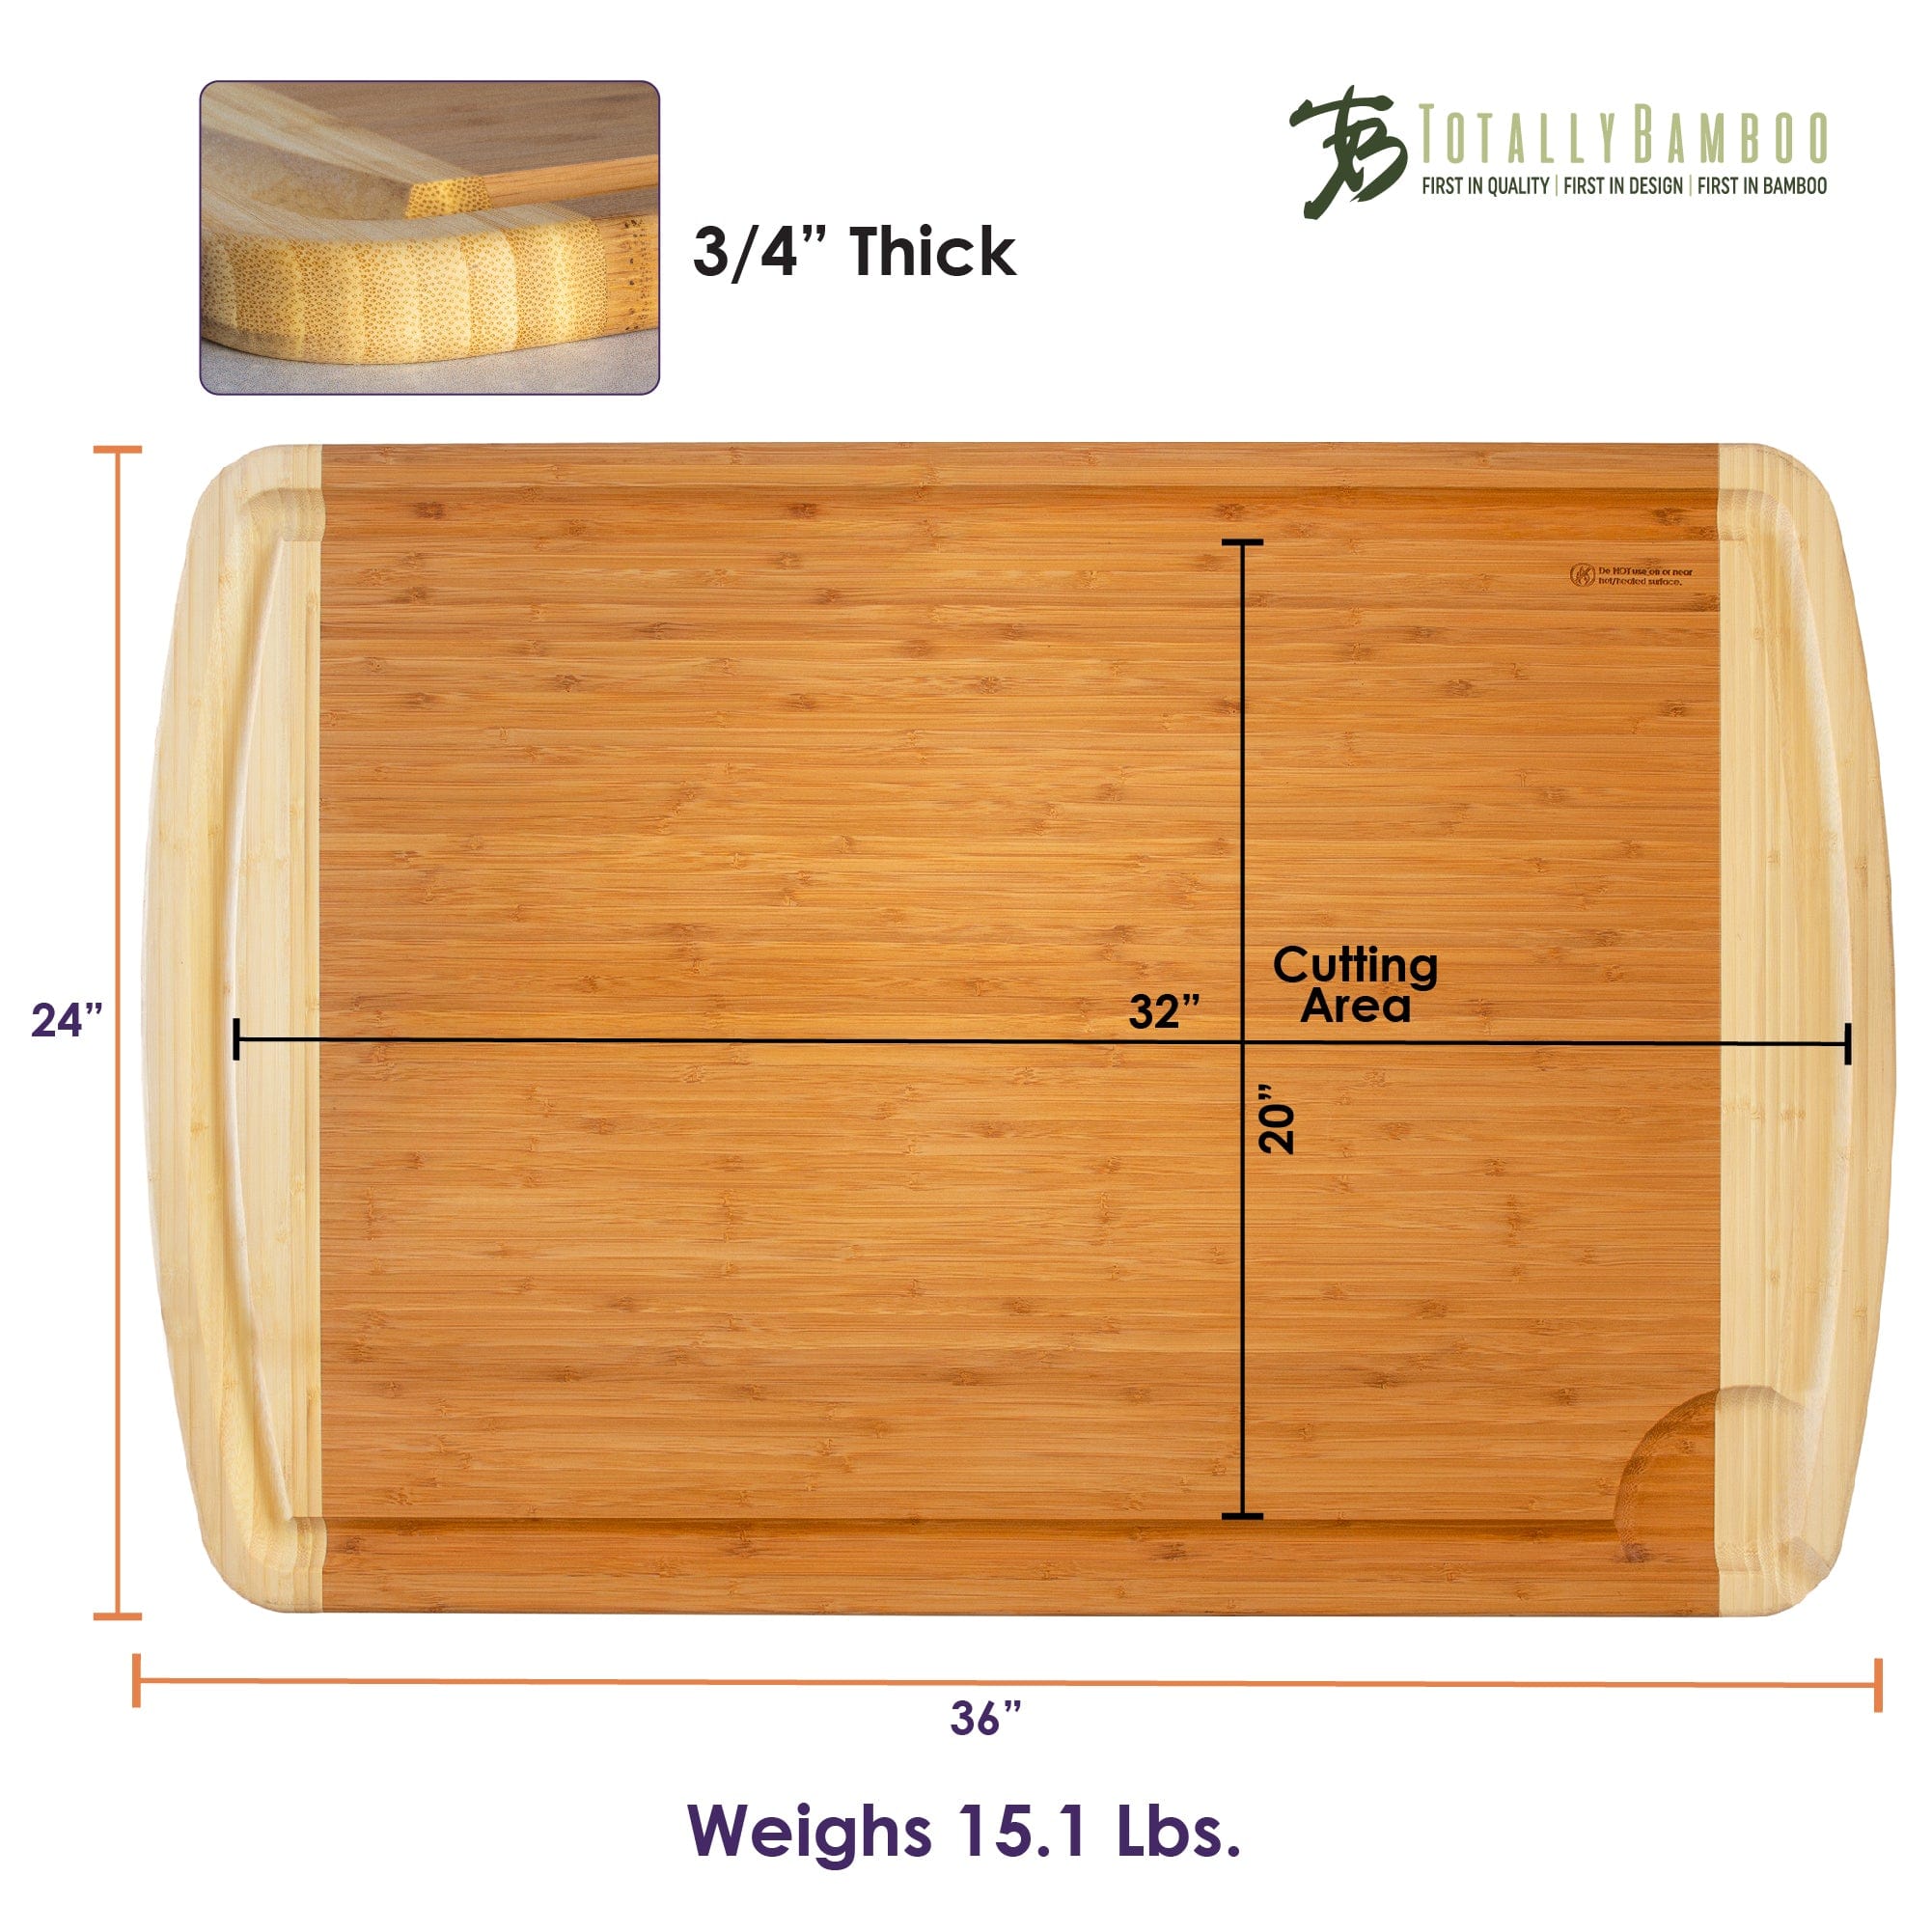 Silicone Cutting Board Portable Foldable Outdoor Soft Cutting Board Home Supplies, Size: 29.6X21.8X0.44CM